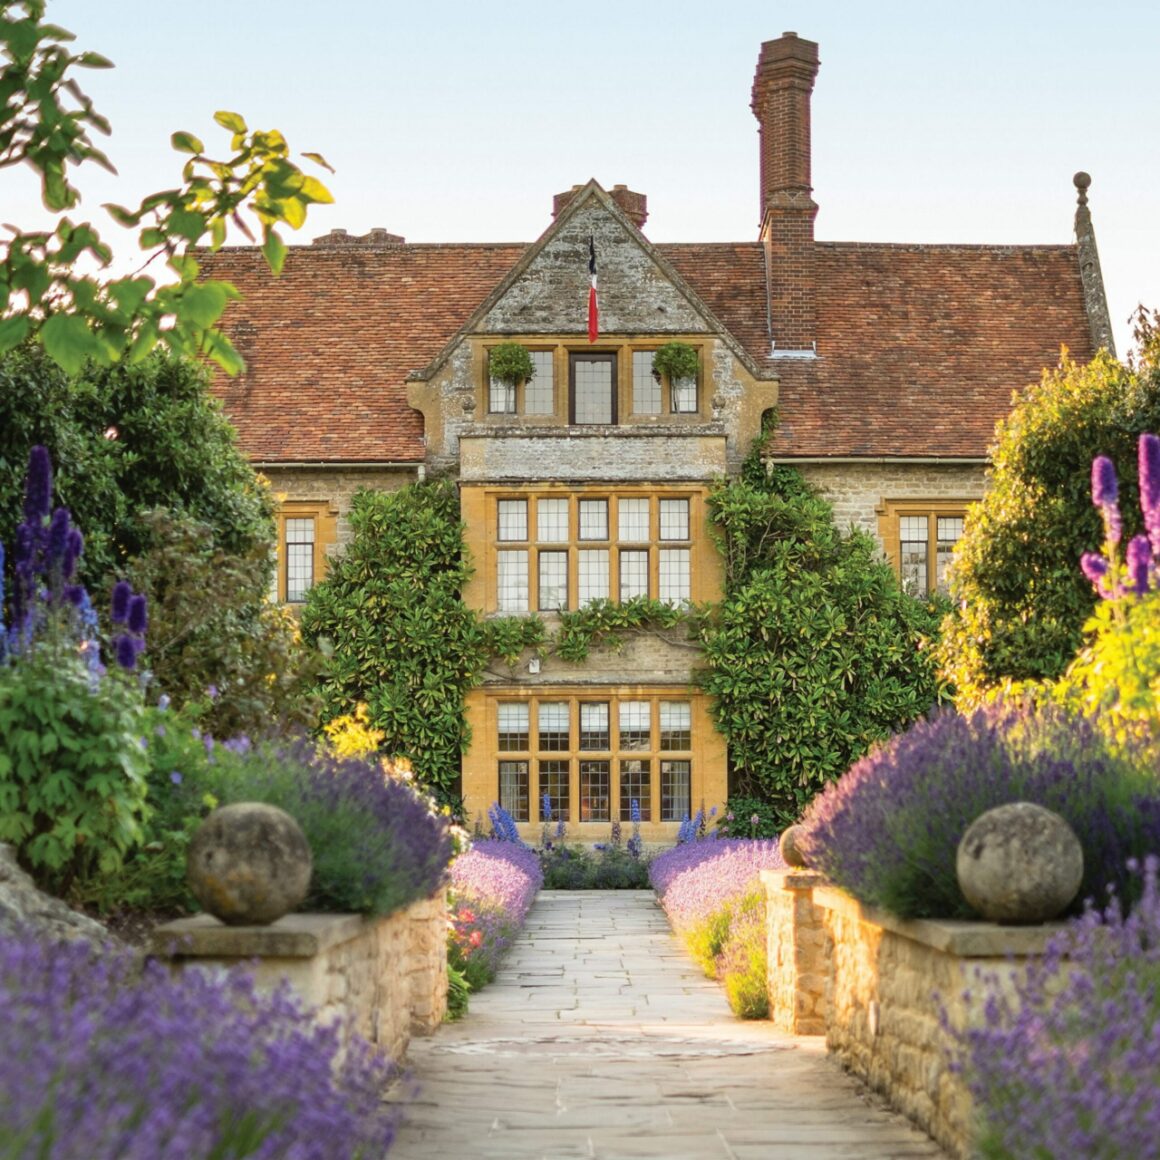 Top 10 Luxury Hotels for your next UK Staycation - Oxfordshire 